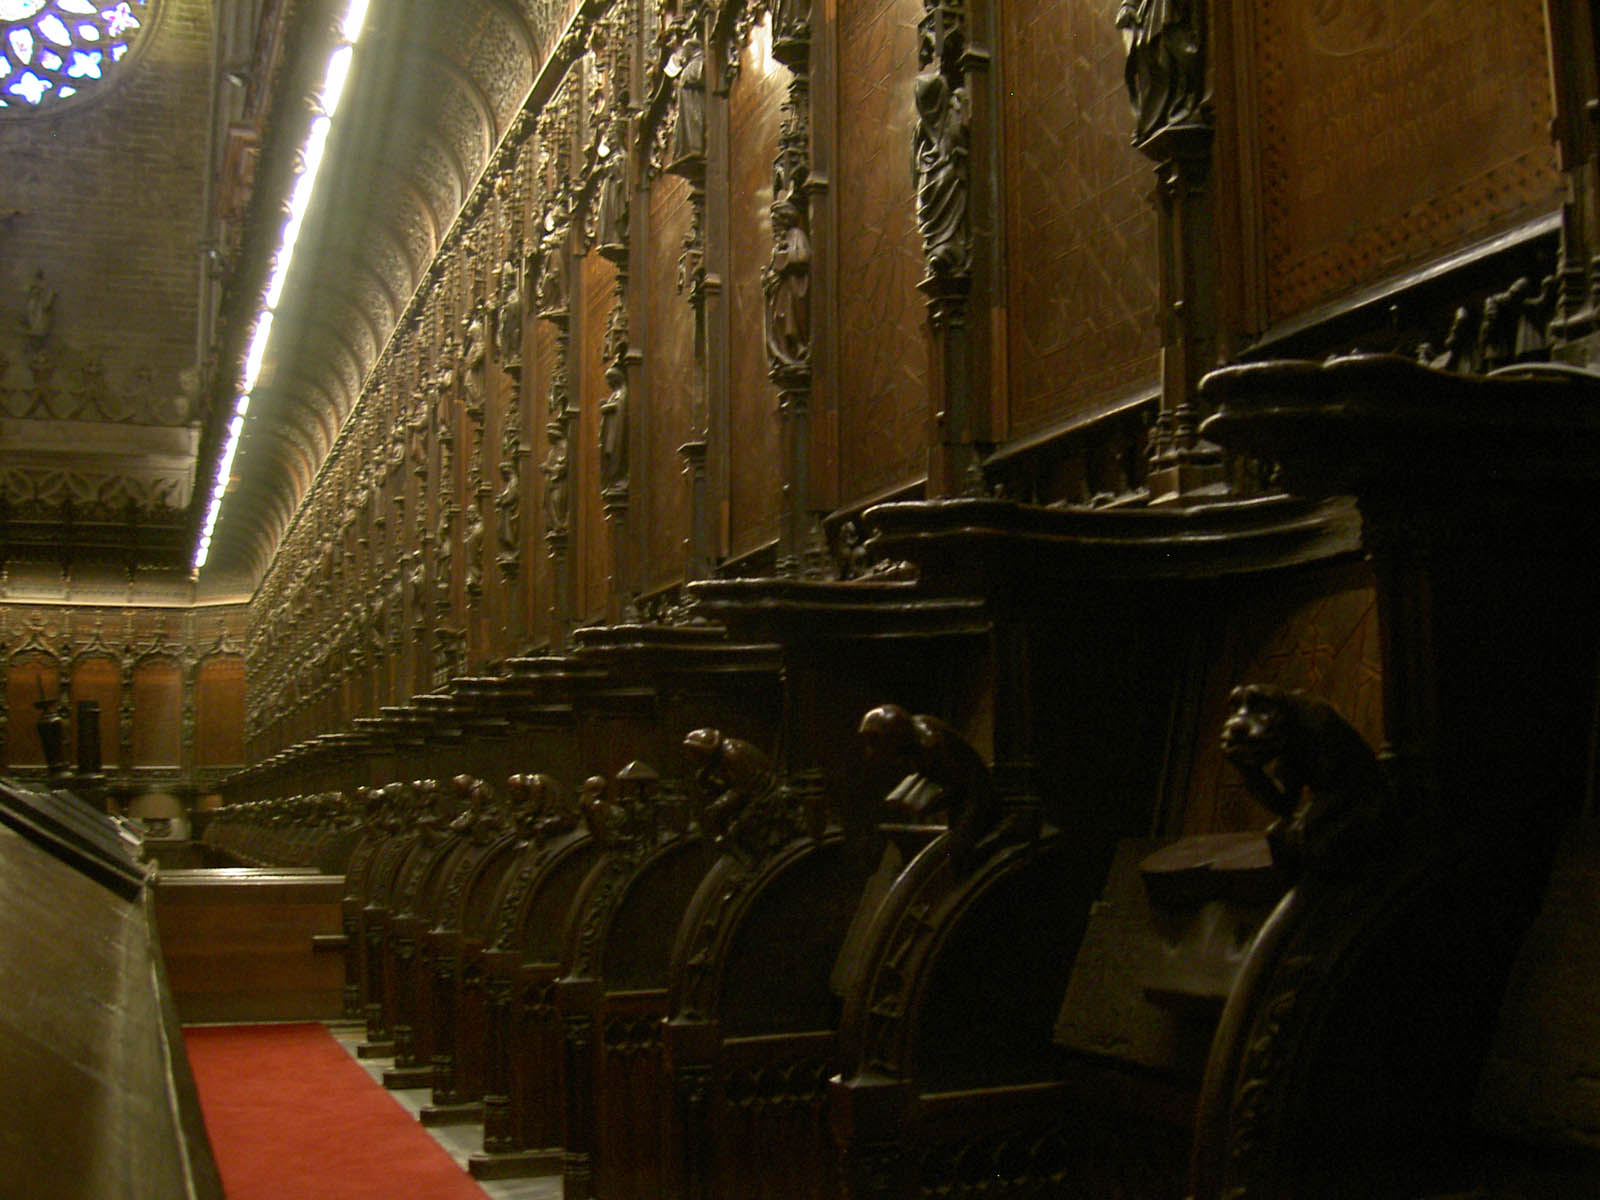 a row of ornate wooden staircases in a church